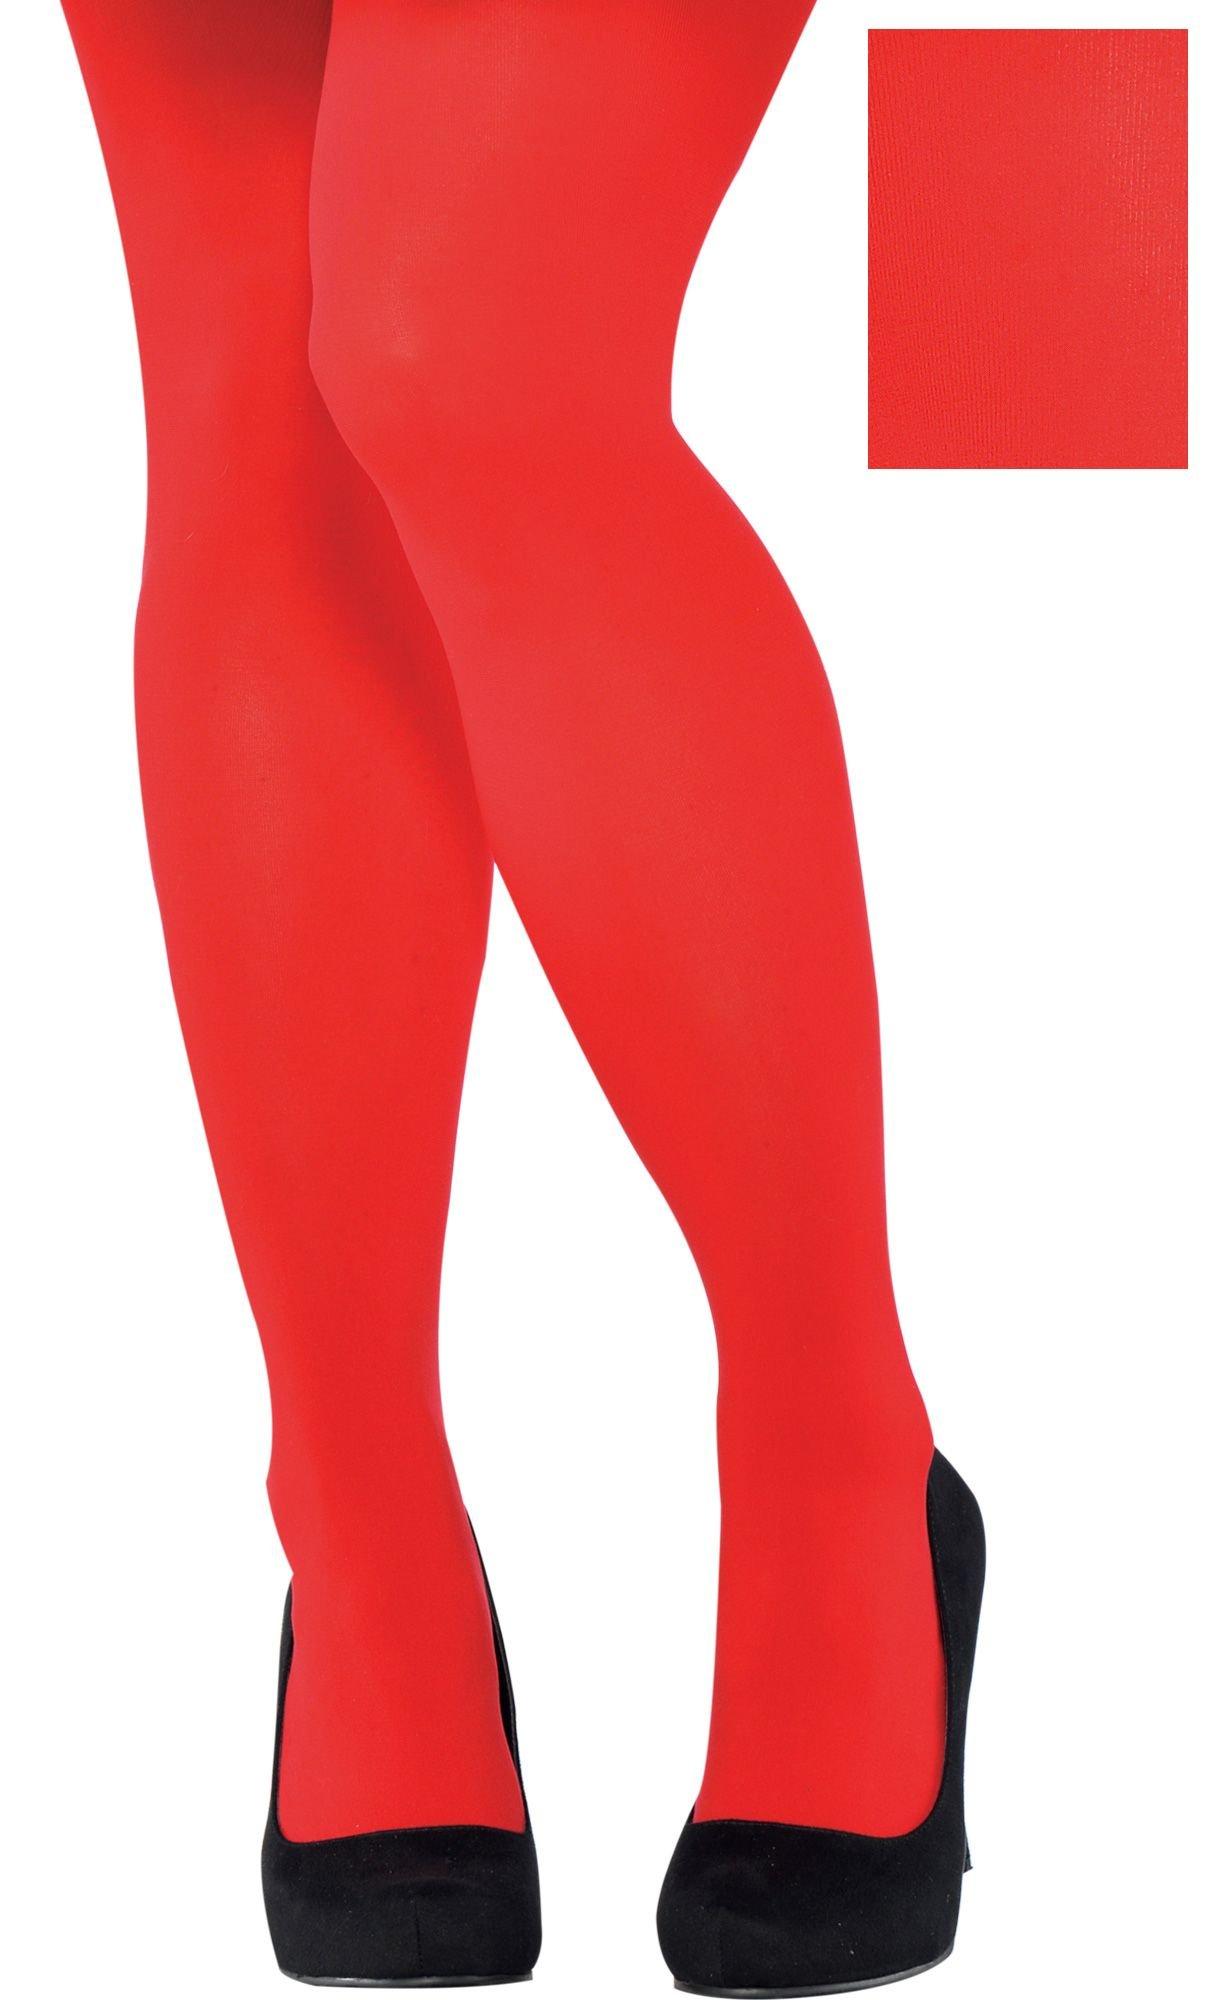 Patty Plain Versatile Tights in MID RED